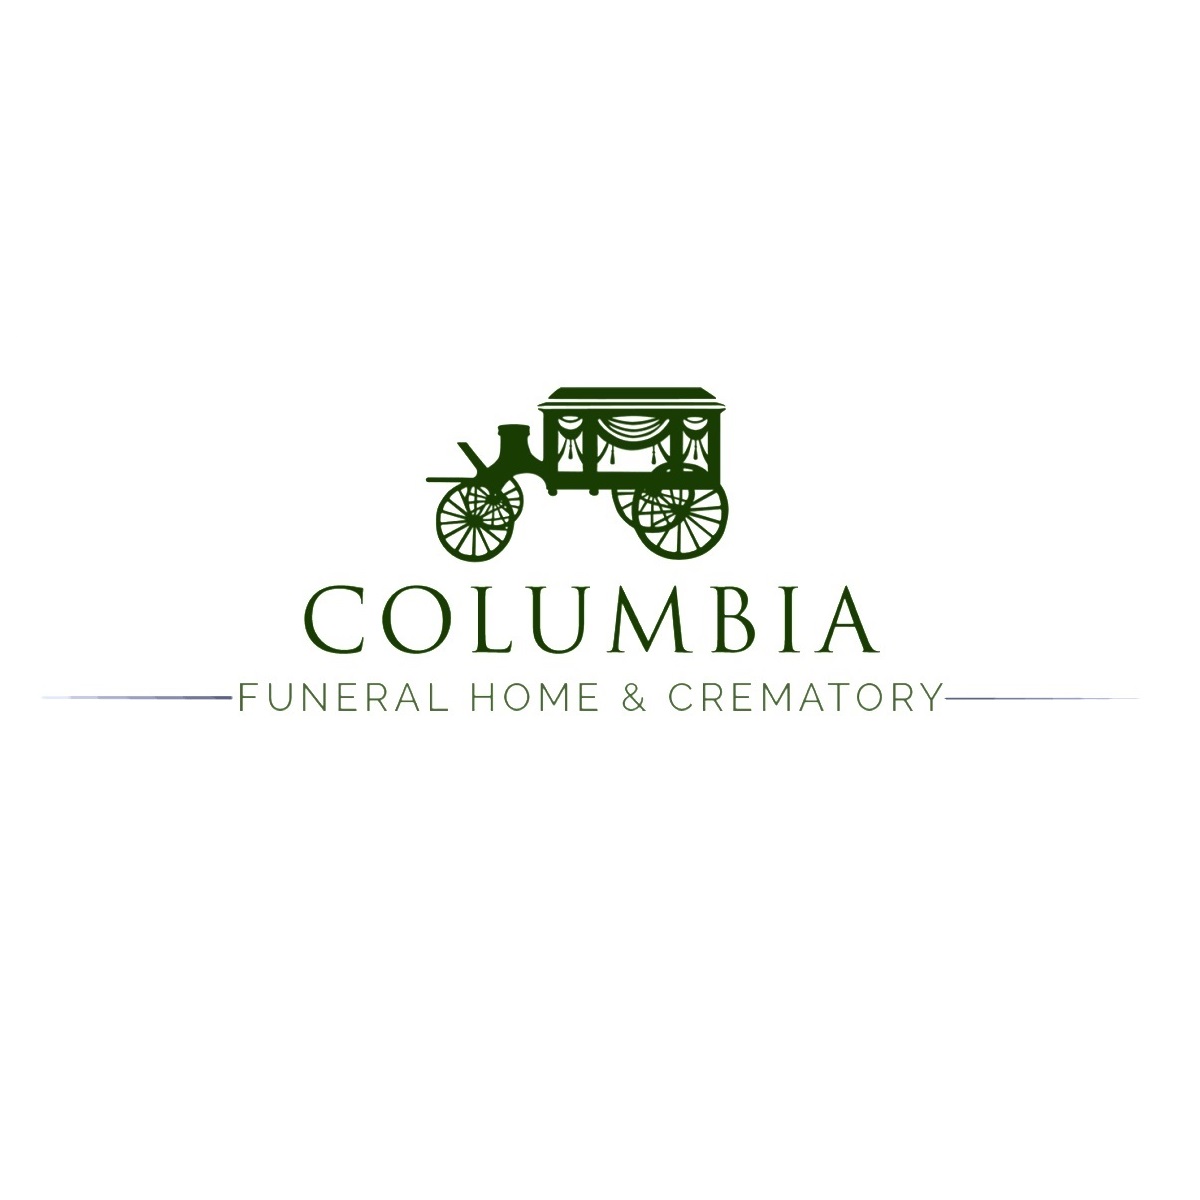 columbia funeral home & crematory | funeral directors in seattle